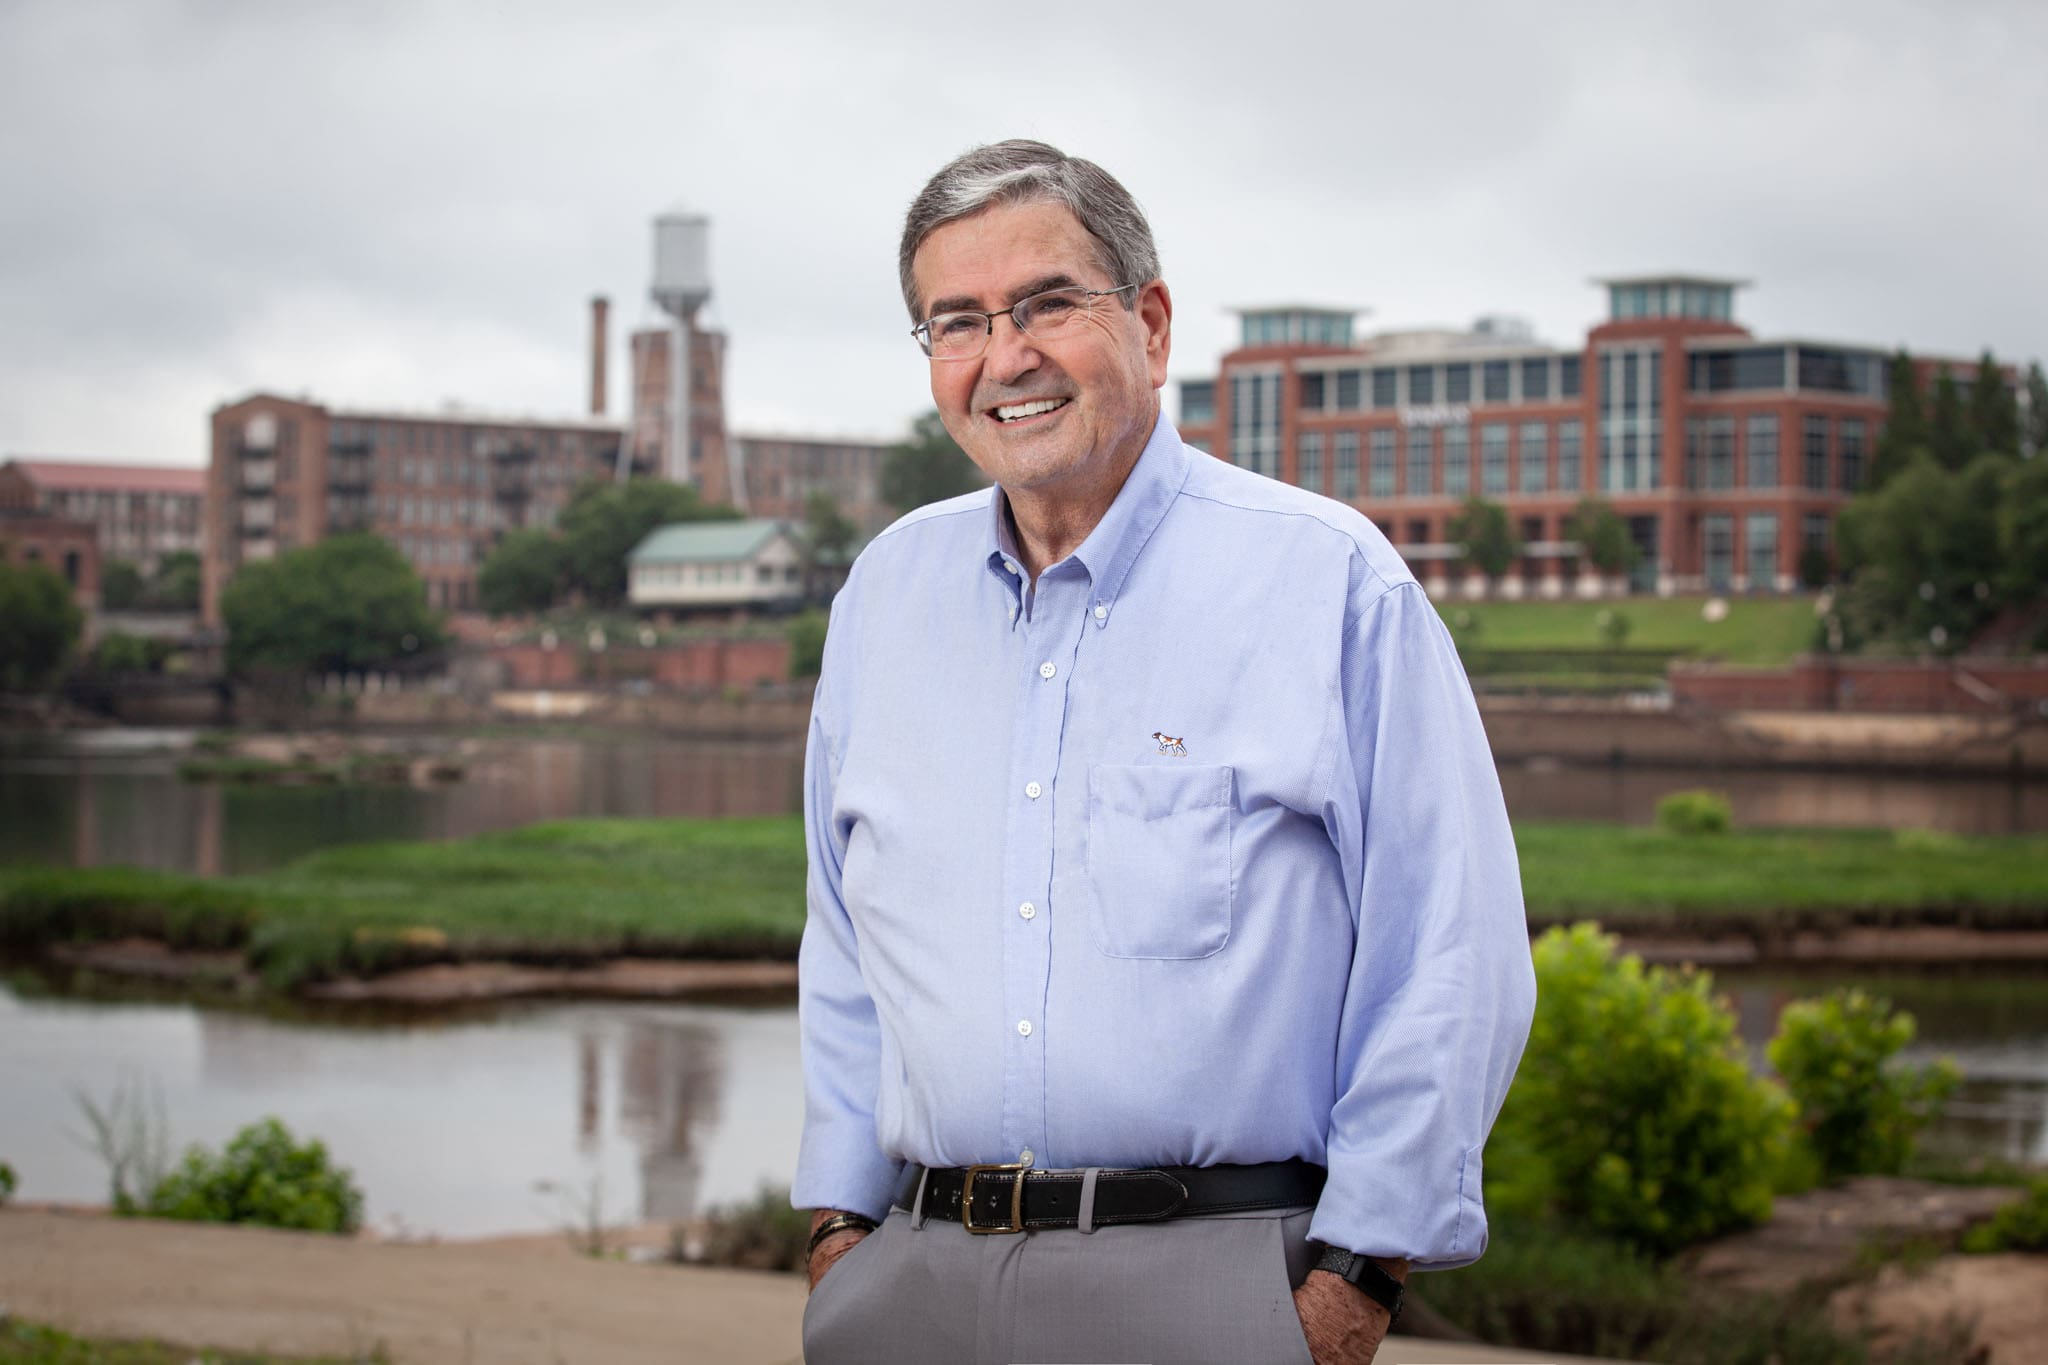 Georgia-Representative-Richard-Smith-smiling-with-the-buildings-and-water-tower-in-the-background-in-Columbus-Georgia